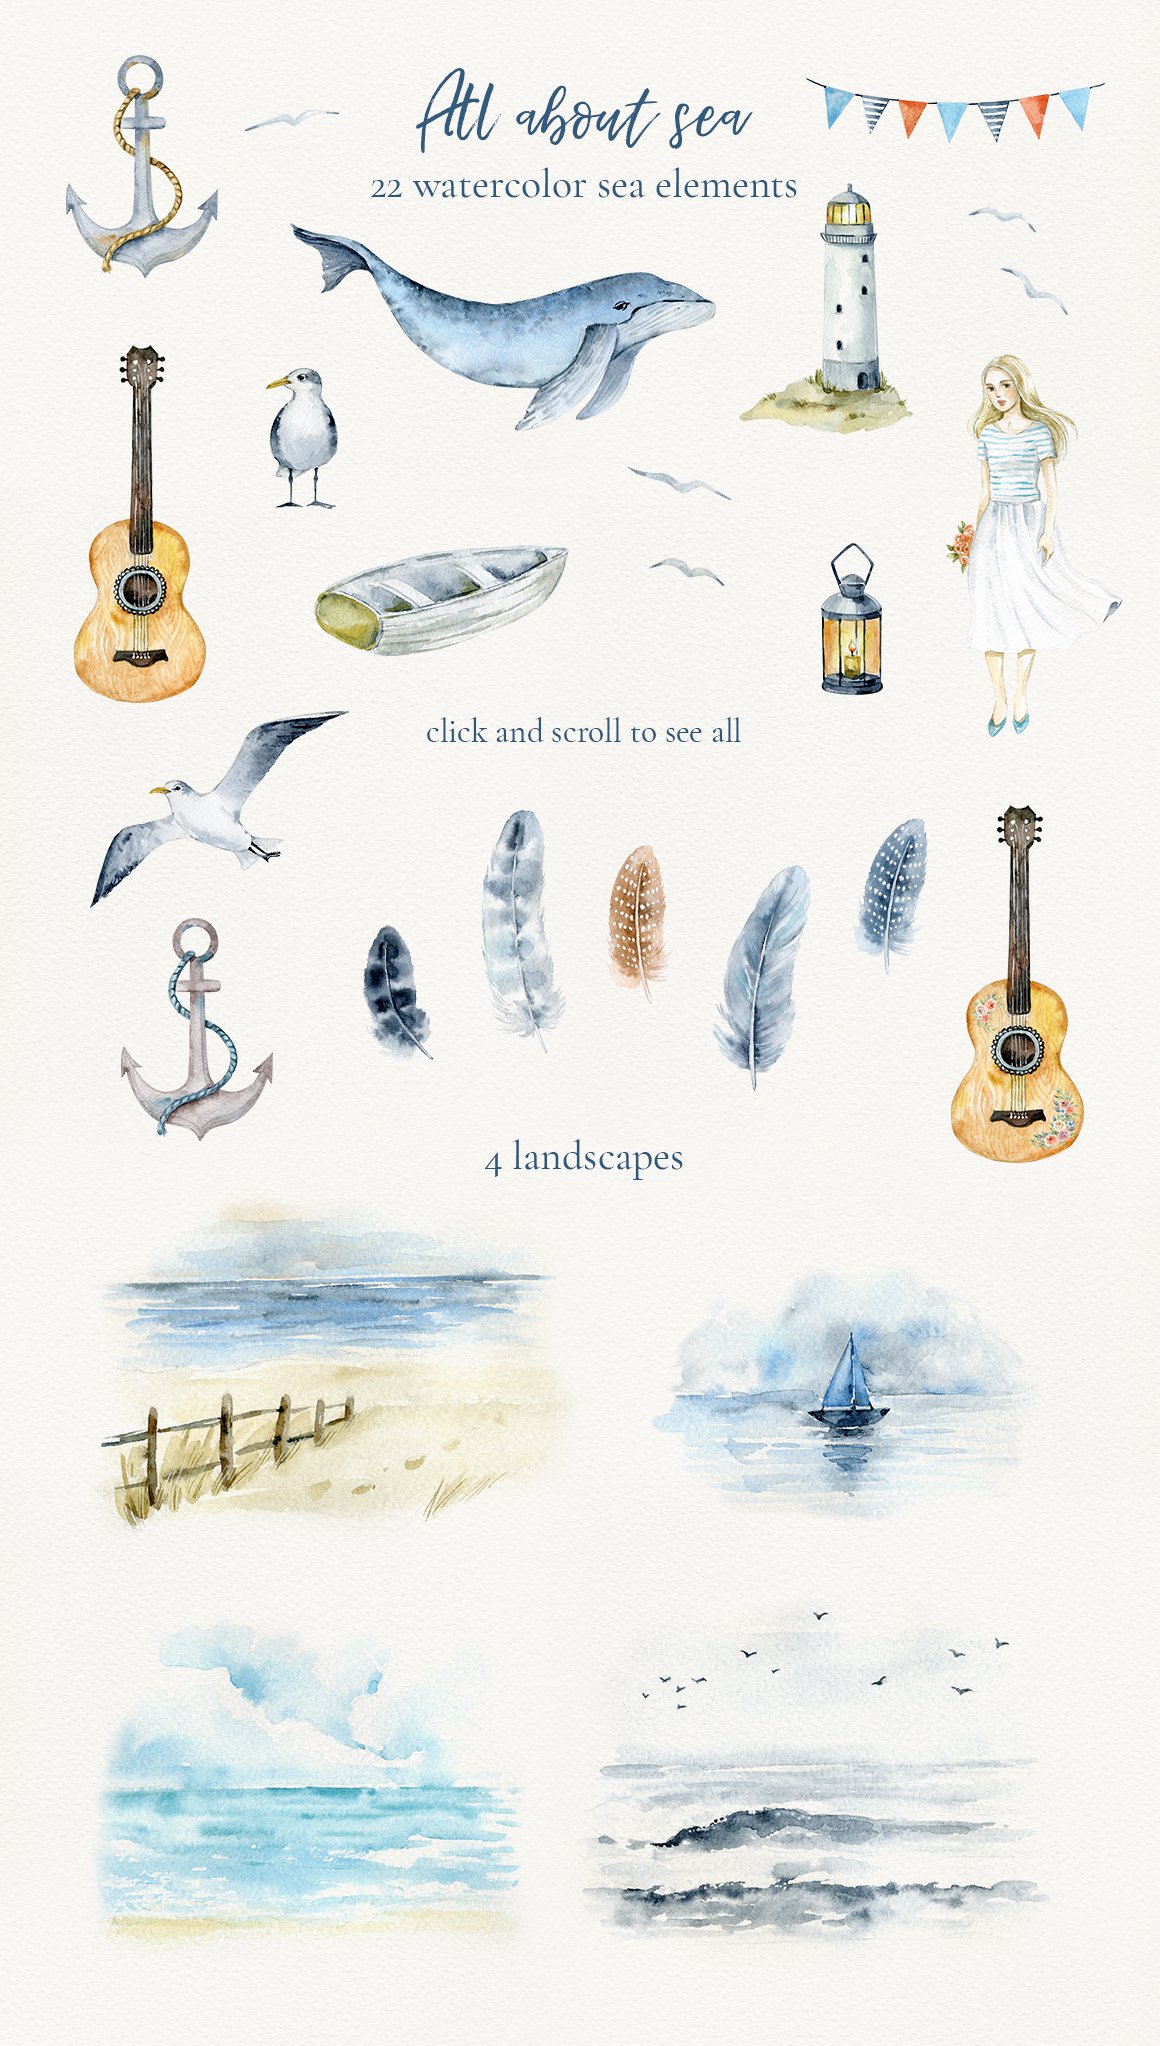 22 illustrations of sea elements and 4 landscapes.